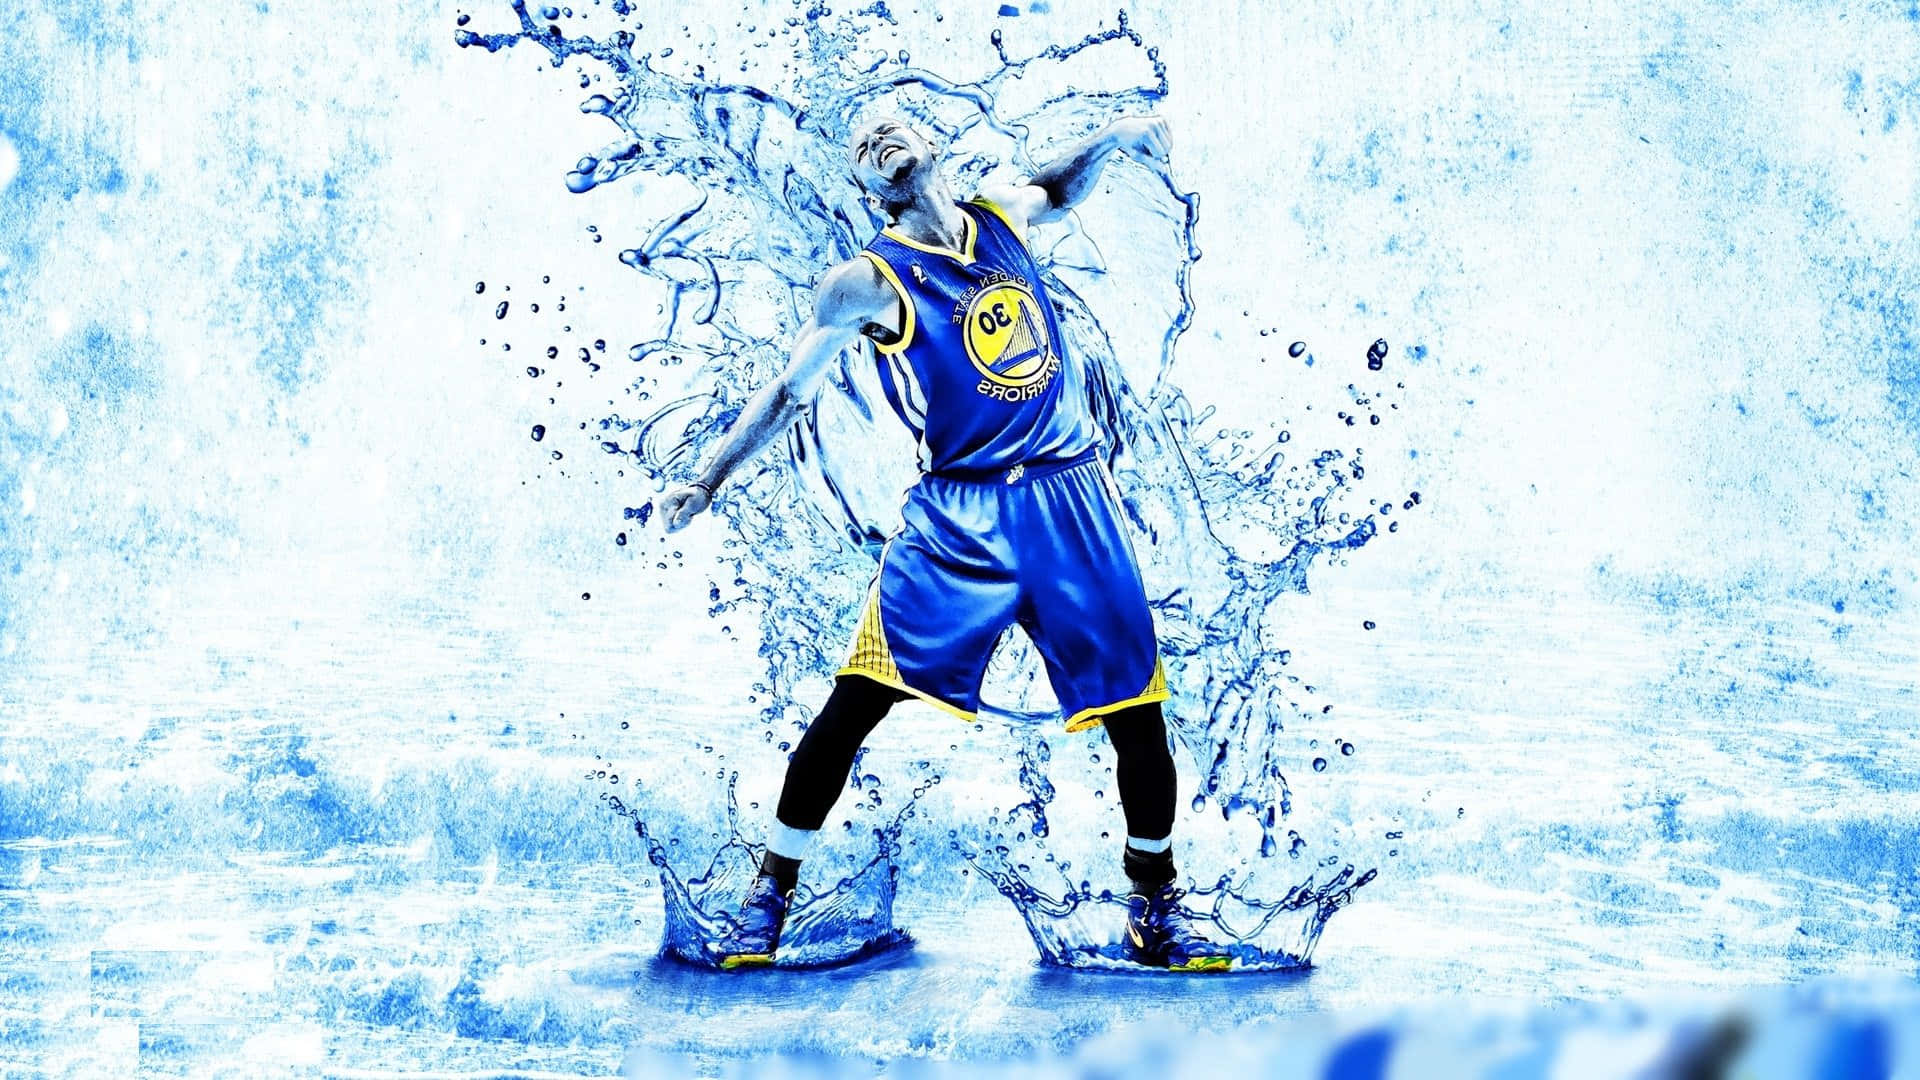 Stephen Curry Is Cool As Ice. Background